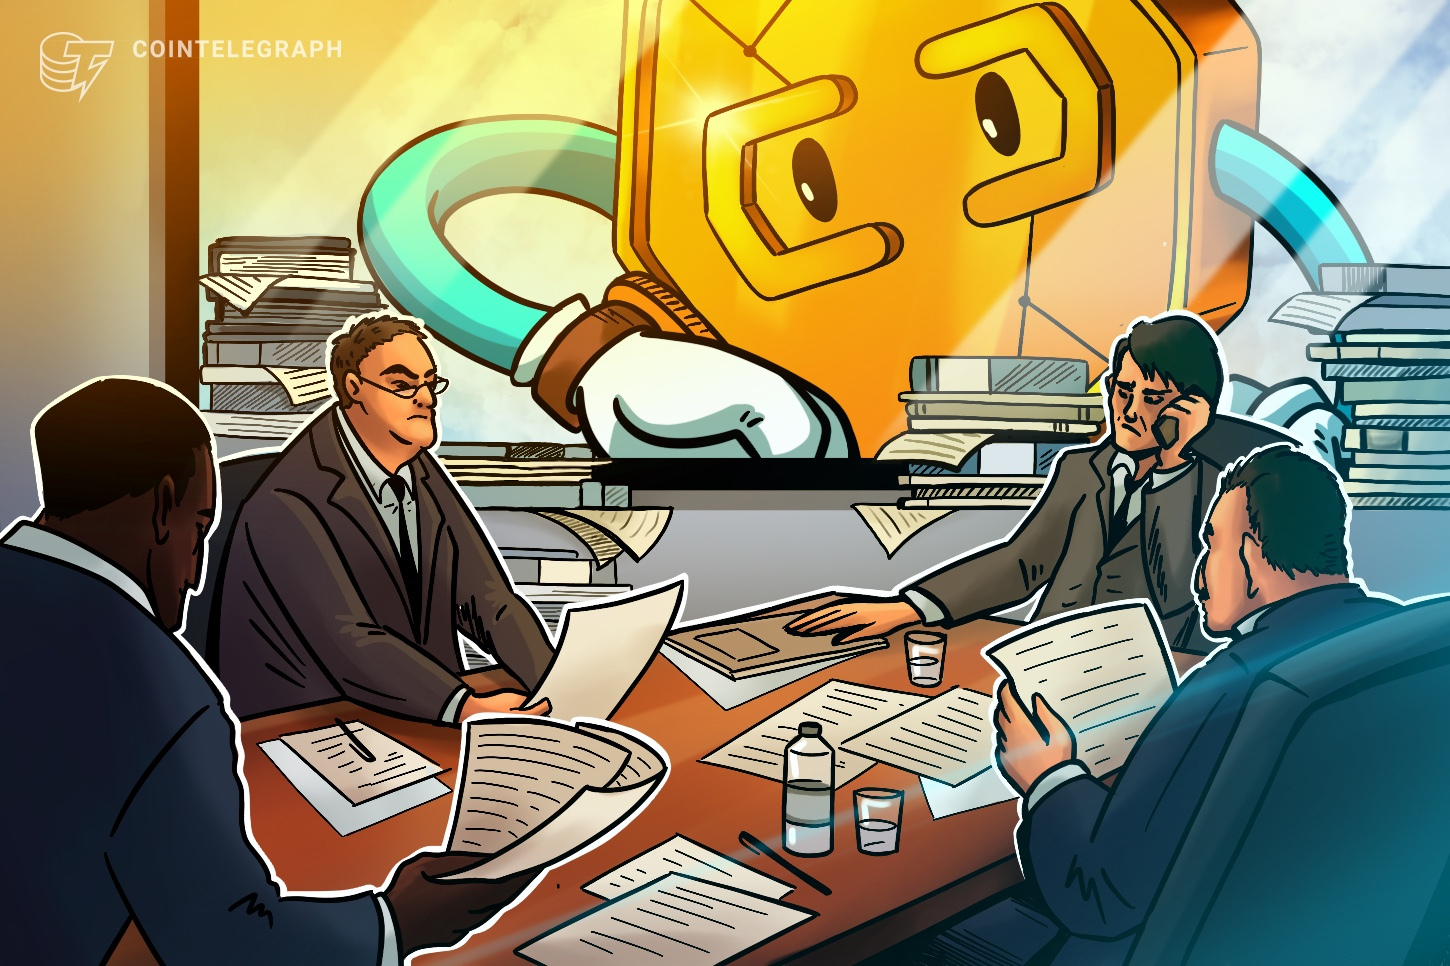 JPMorgan Chase execs weigh in on stablecoin regulation, crypto competitors